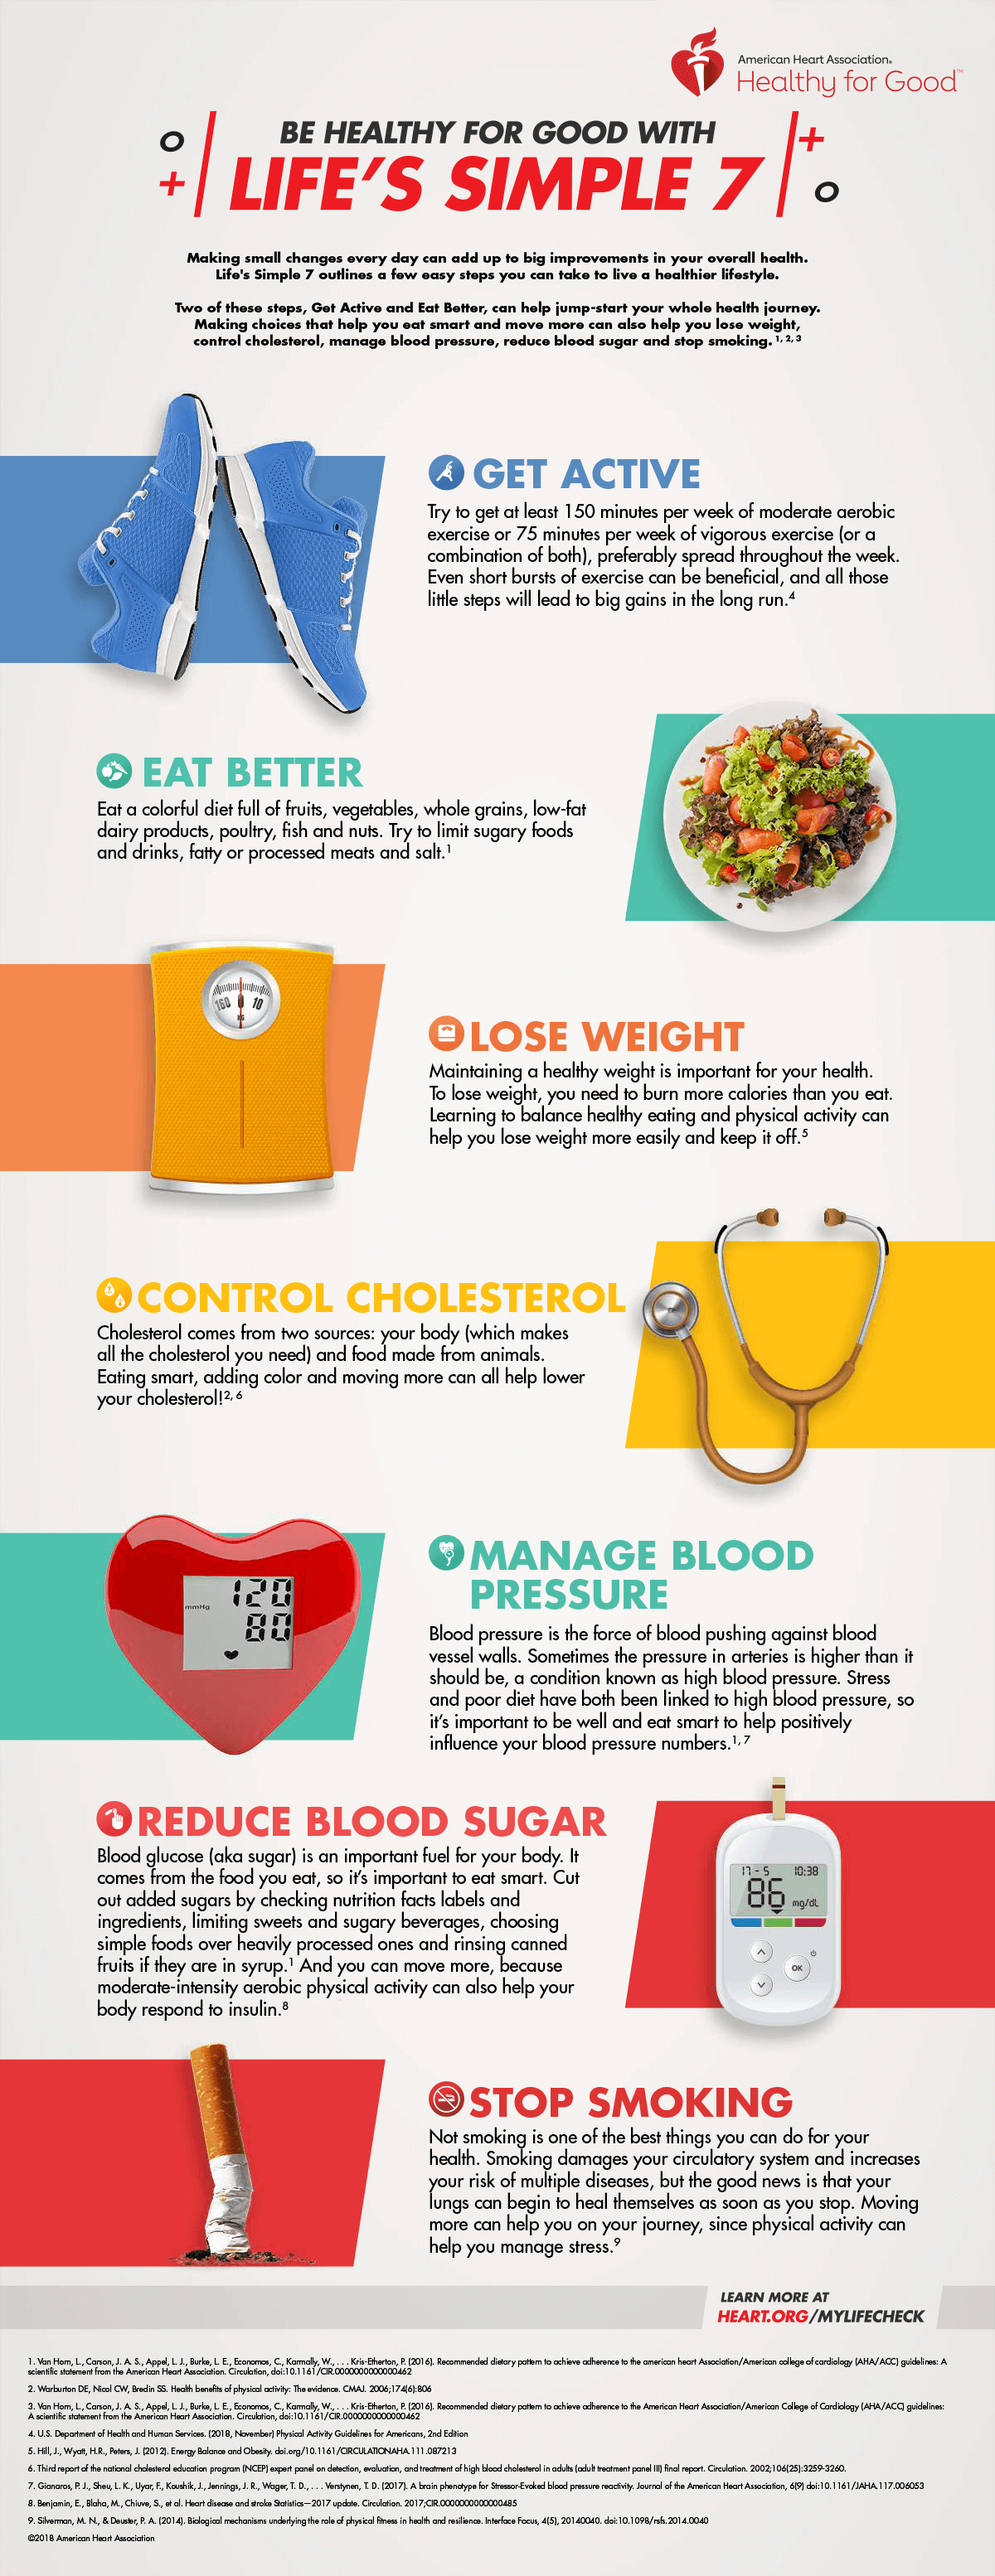 Be Healthy For Good With Lifes Simple 7 Infographic American Heart